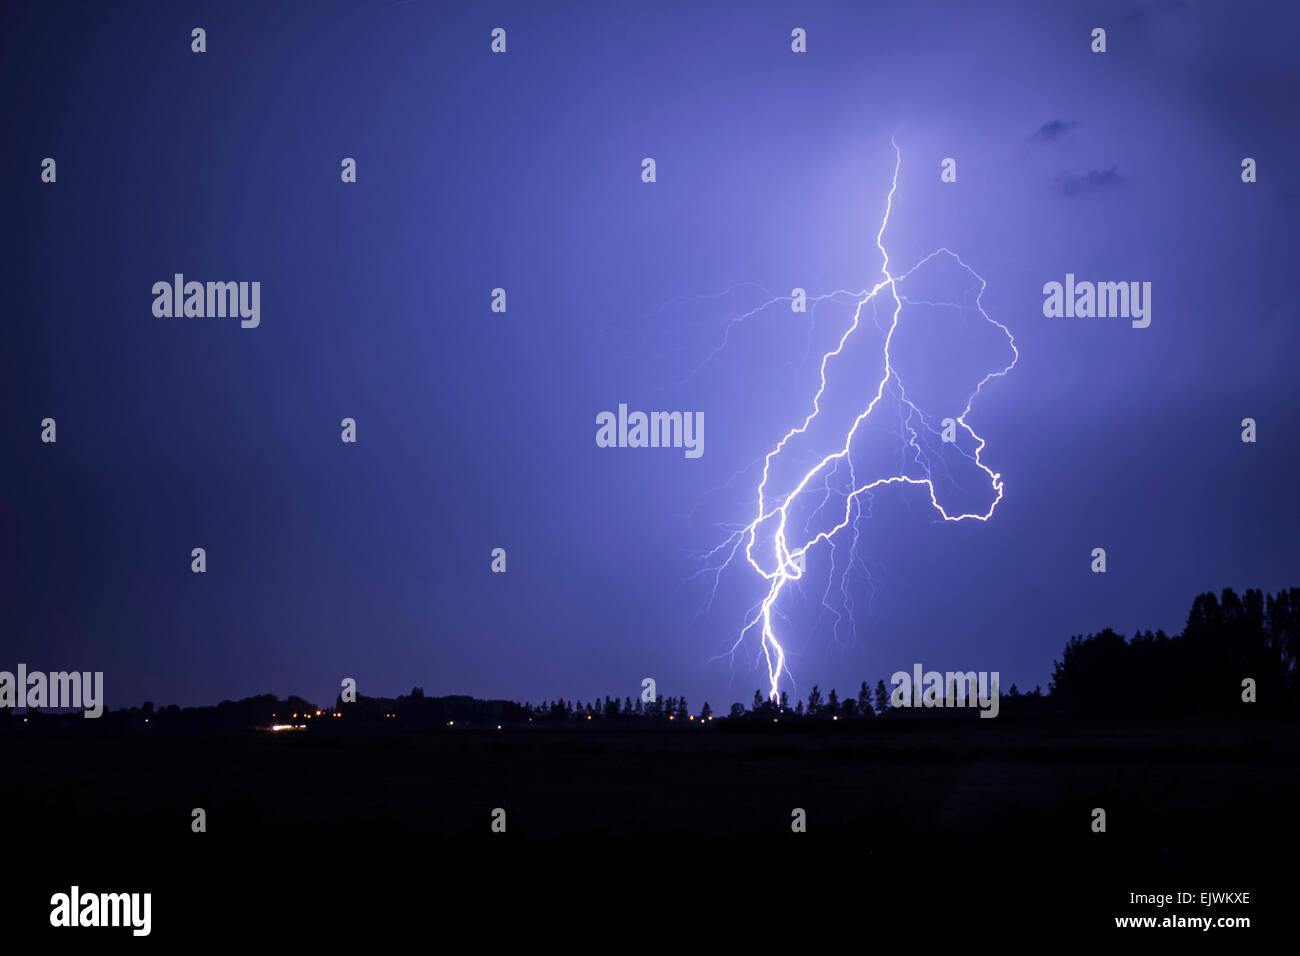 Lightning strikes close by causing a purple color in the clouded sky. Stock Photo